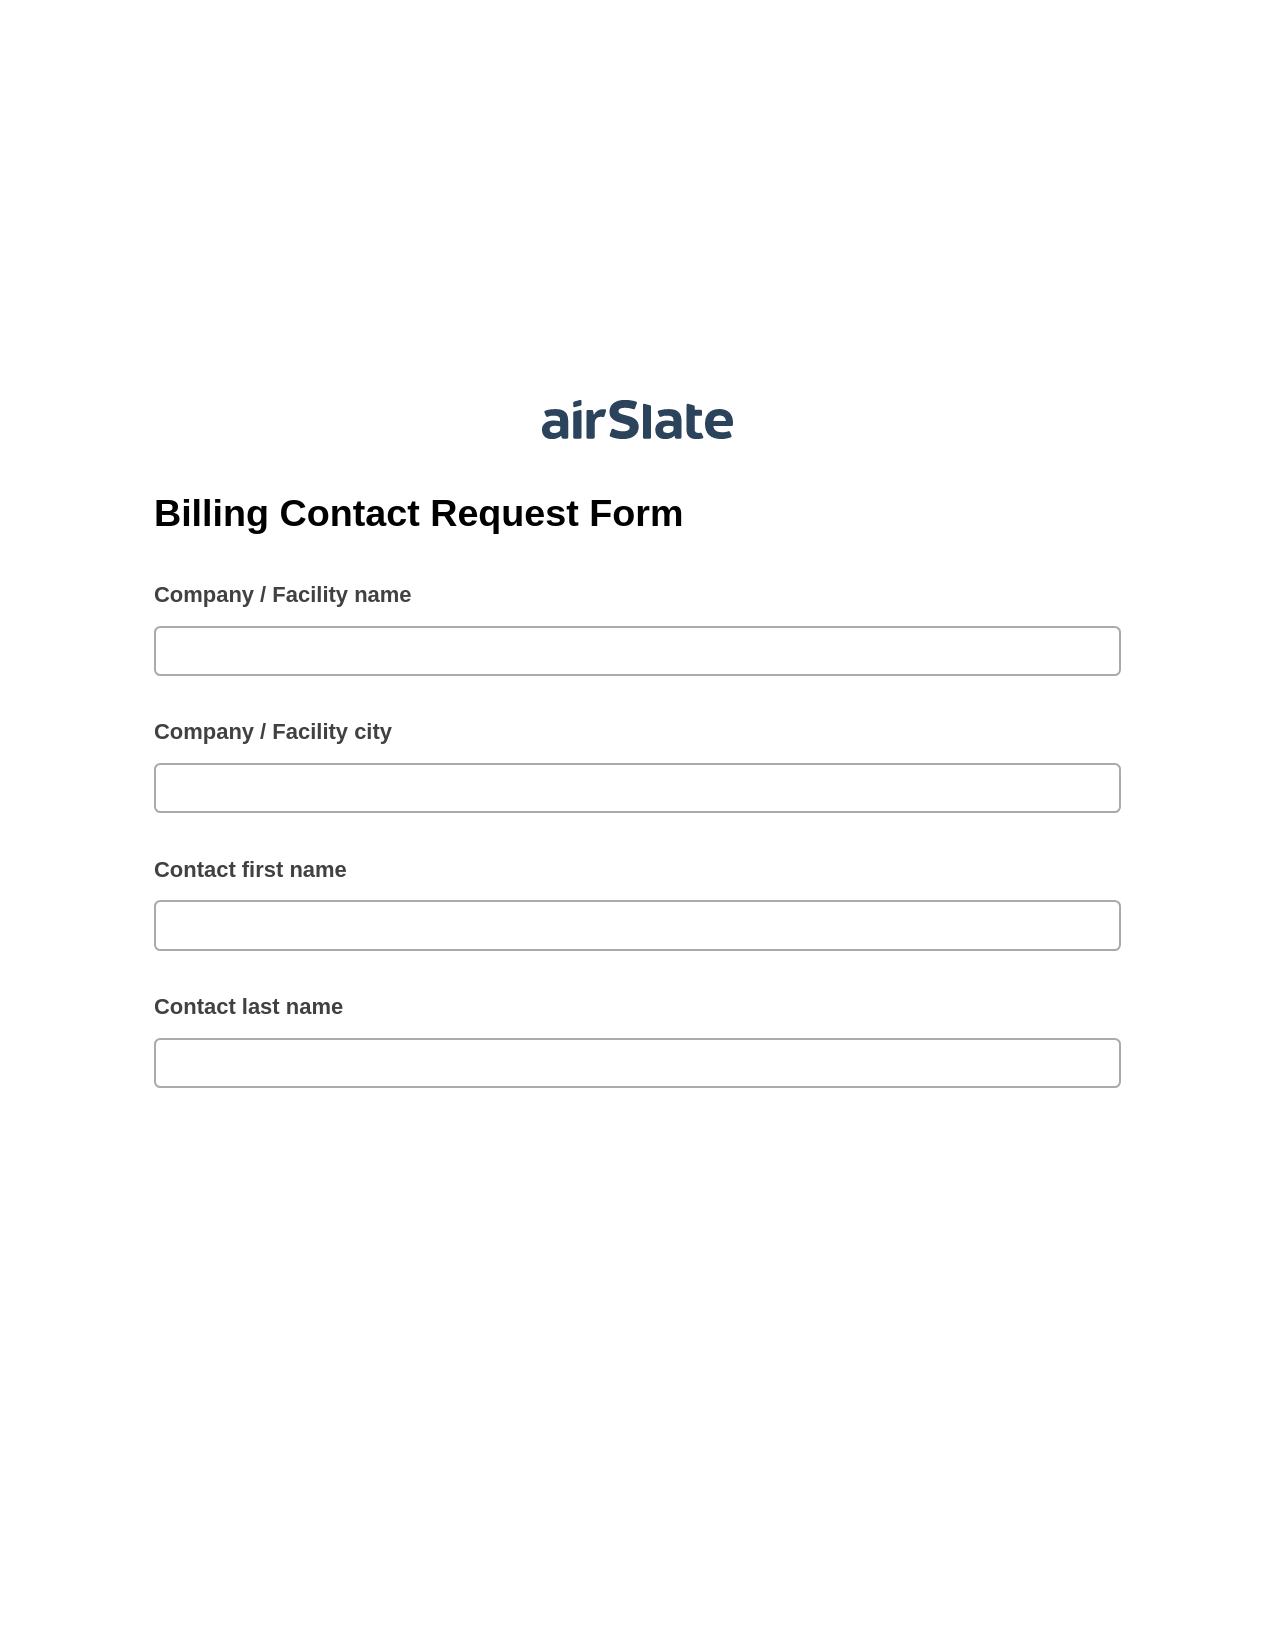 Billing Contact Request Form Pre-fill Slate from MS Dynamics 365 Records Bot, Export to MS Dynamics 365 Bot, Export to Excel 365 Bot